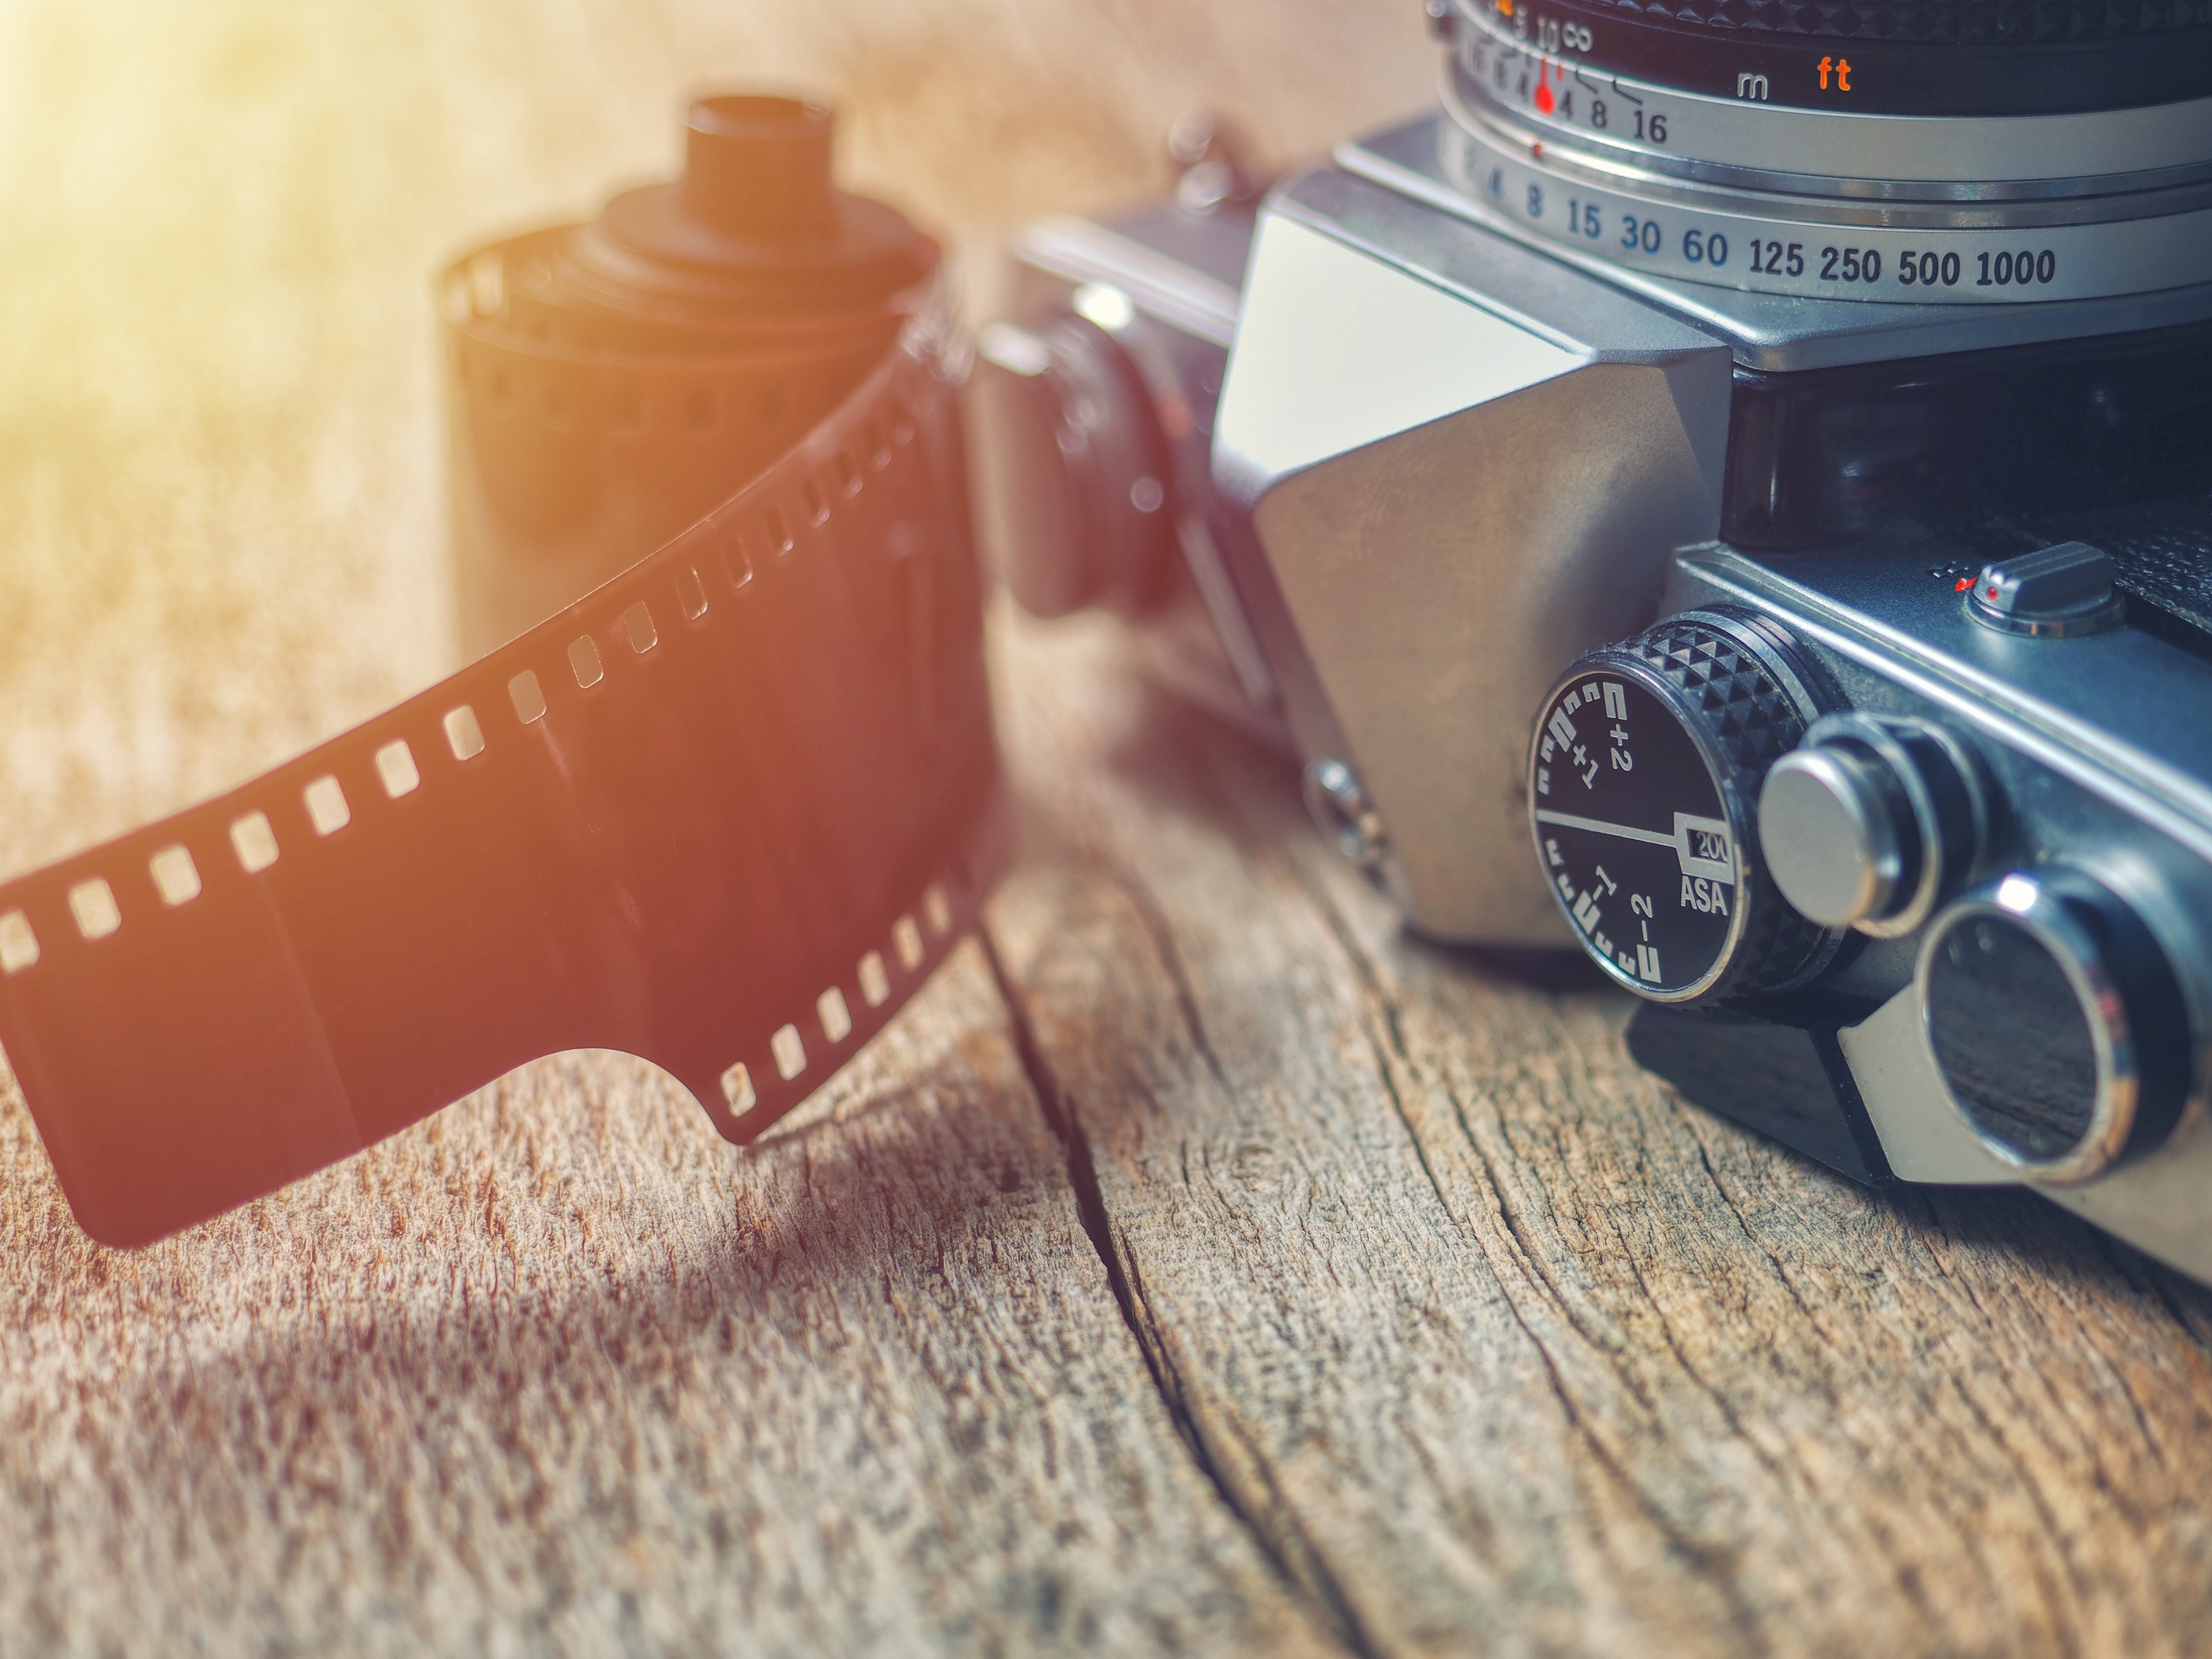 Why the price of 35 mm film has skyrocketed